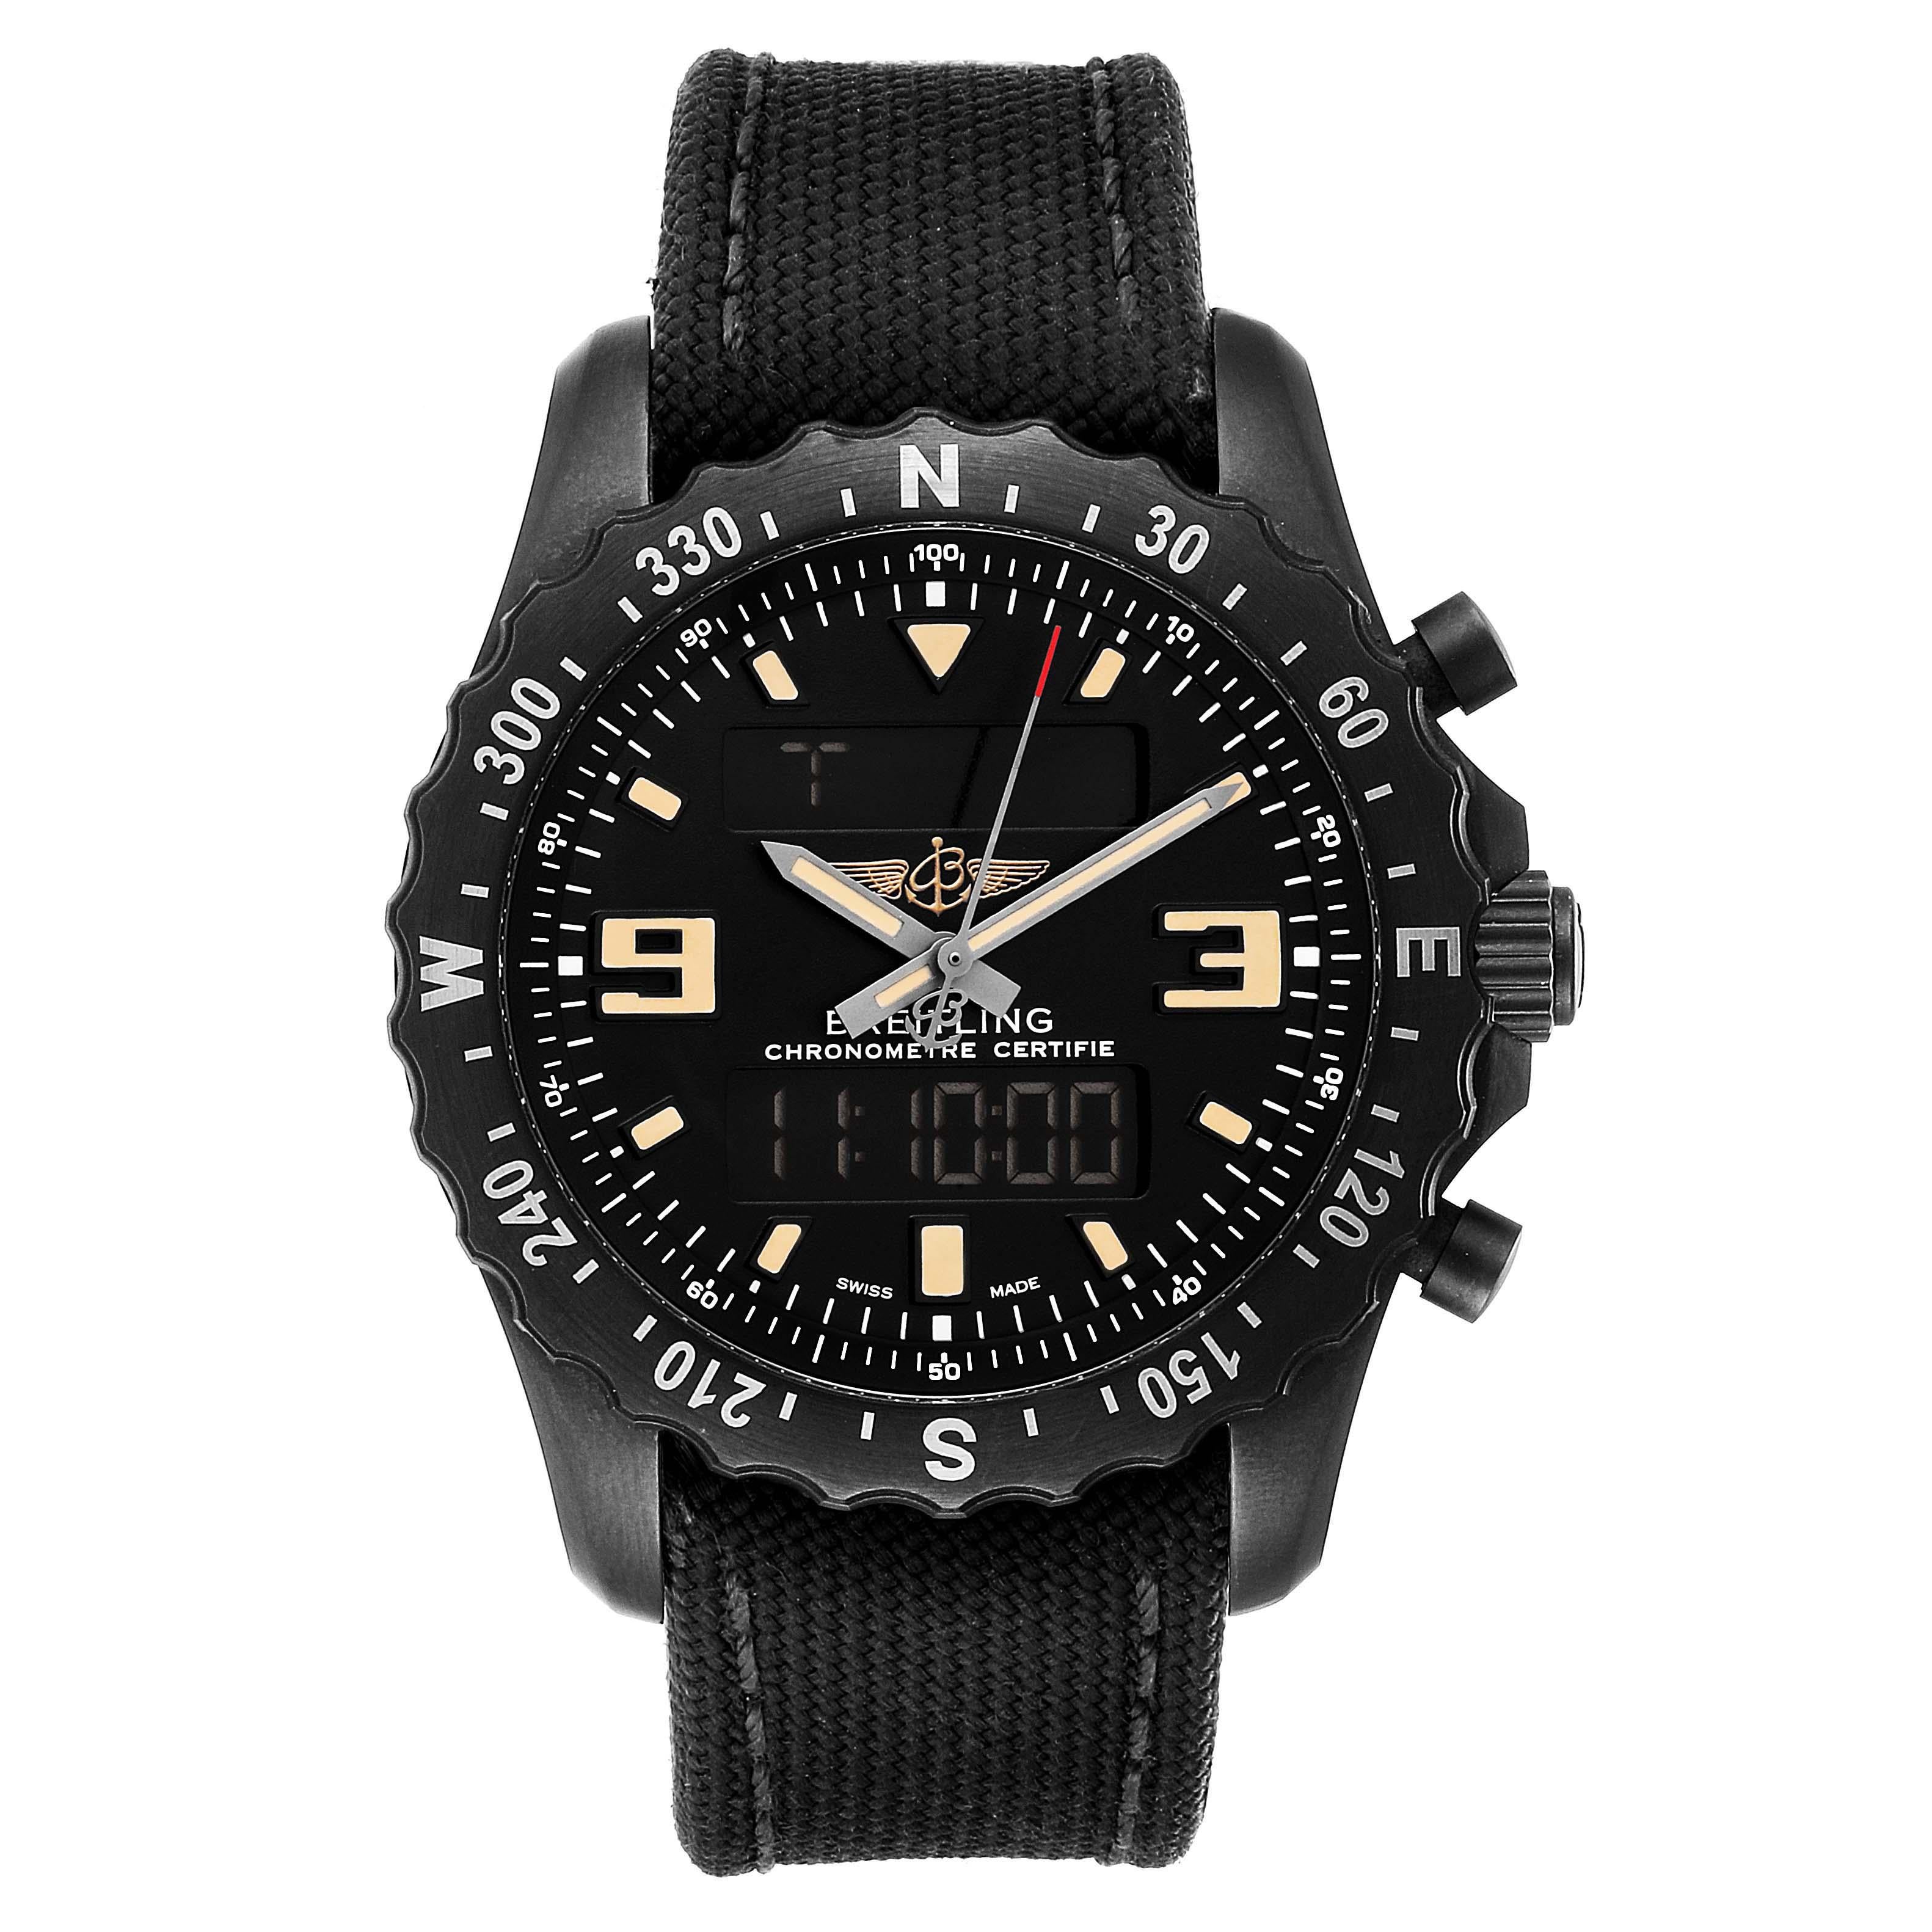 Breitling Chronospace Military GMT Alarm Blacksteel Mens Watch M78366. Quartz movement. GMT second time zone and Alarm feature. Perpetual Day and Date calendar. Backlight feature. Black steel case 46 mm in diameter. Case thickness 15.6mm. Breitling